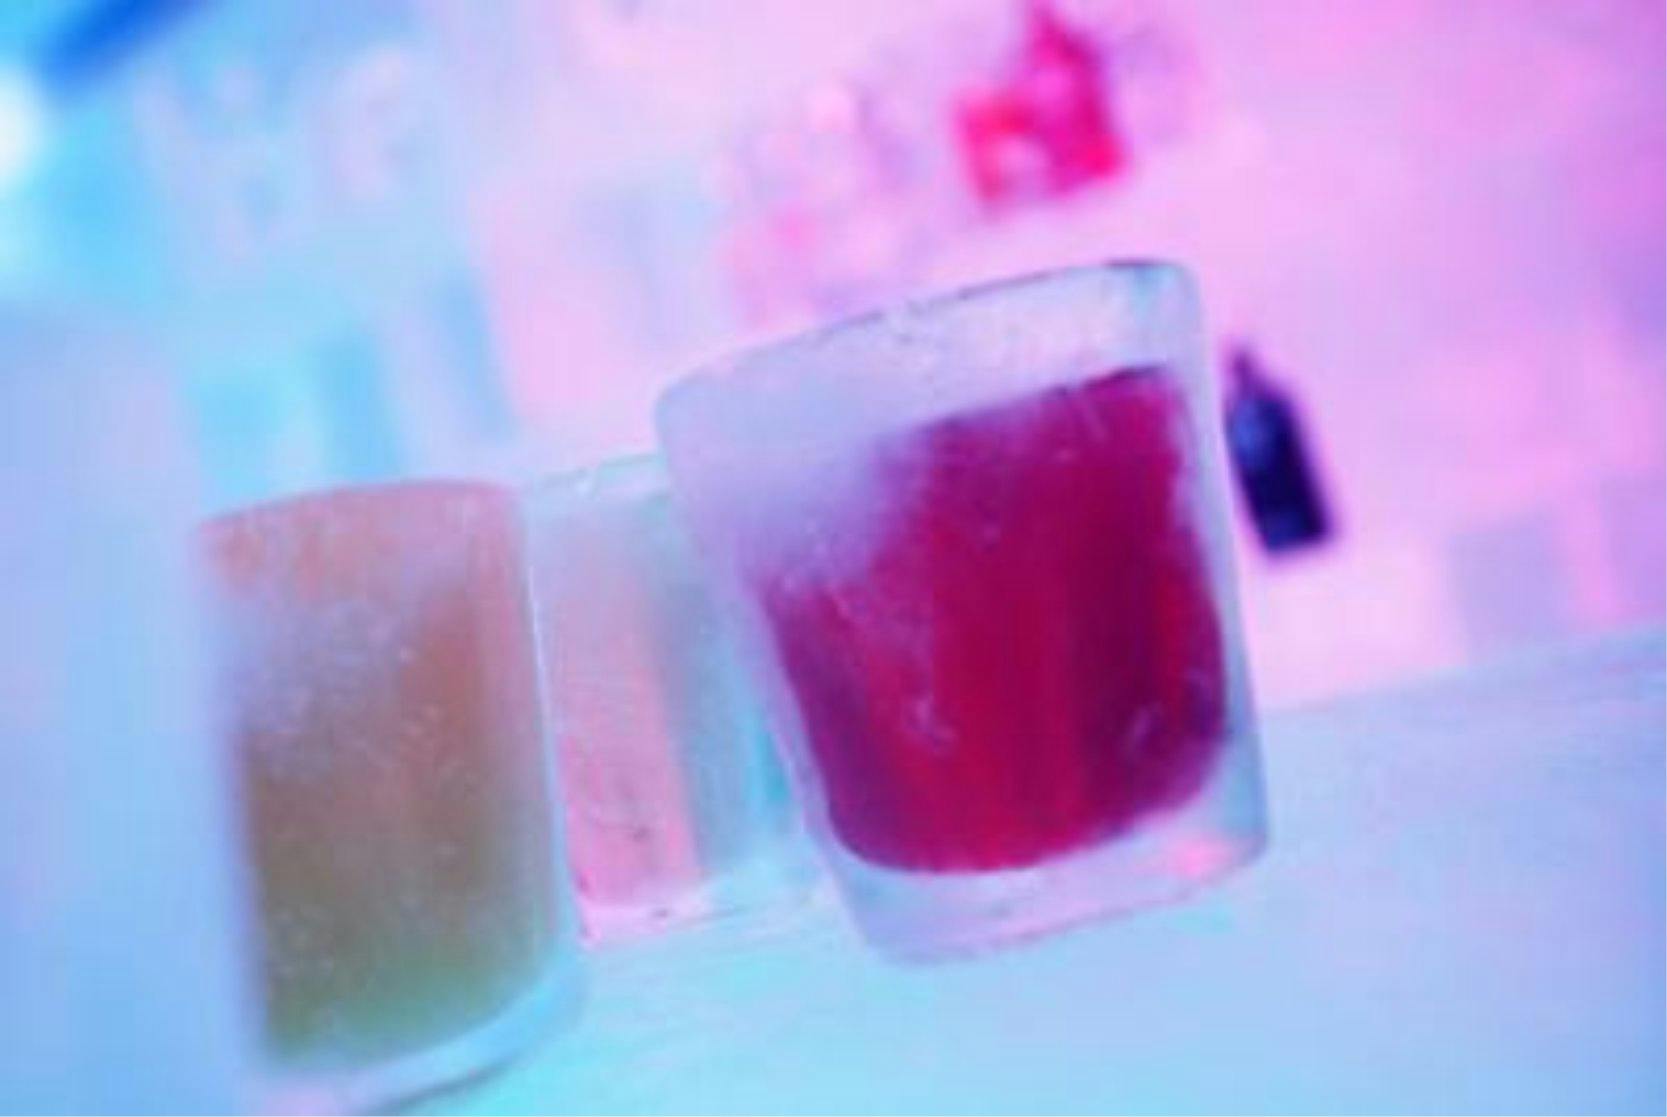 Ice glasses with delicious cocktails in Below Zero Ice bar.